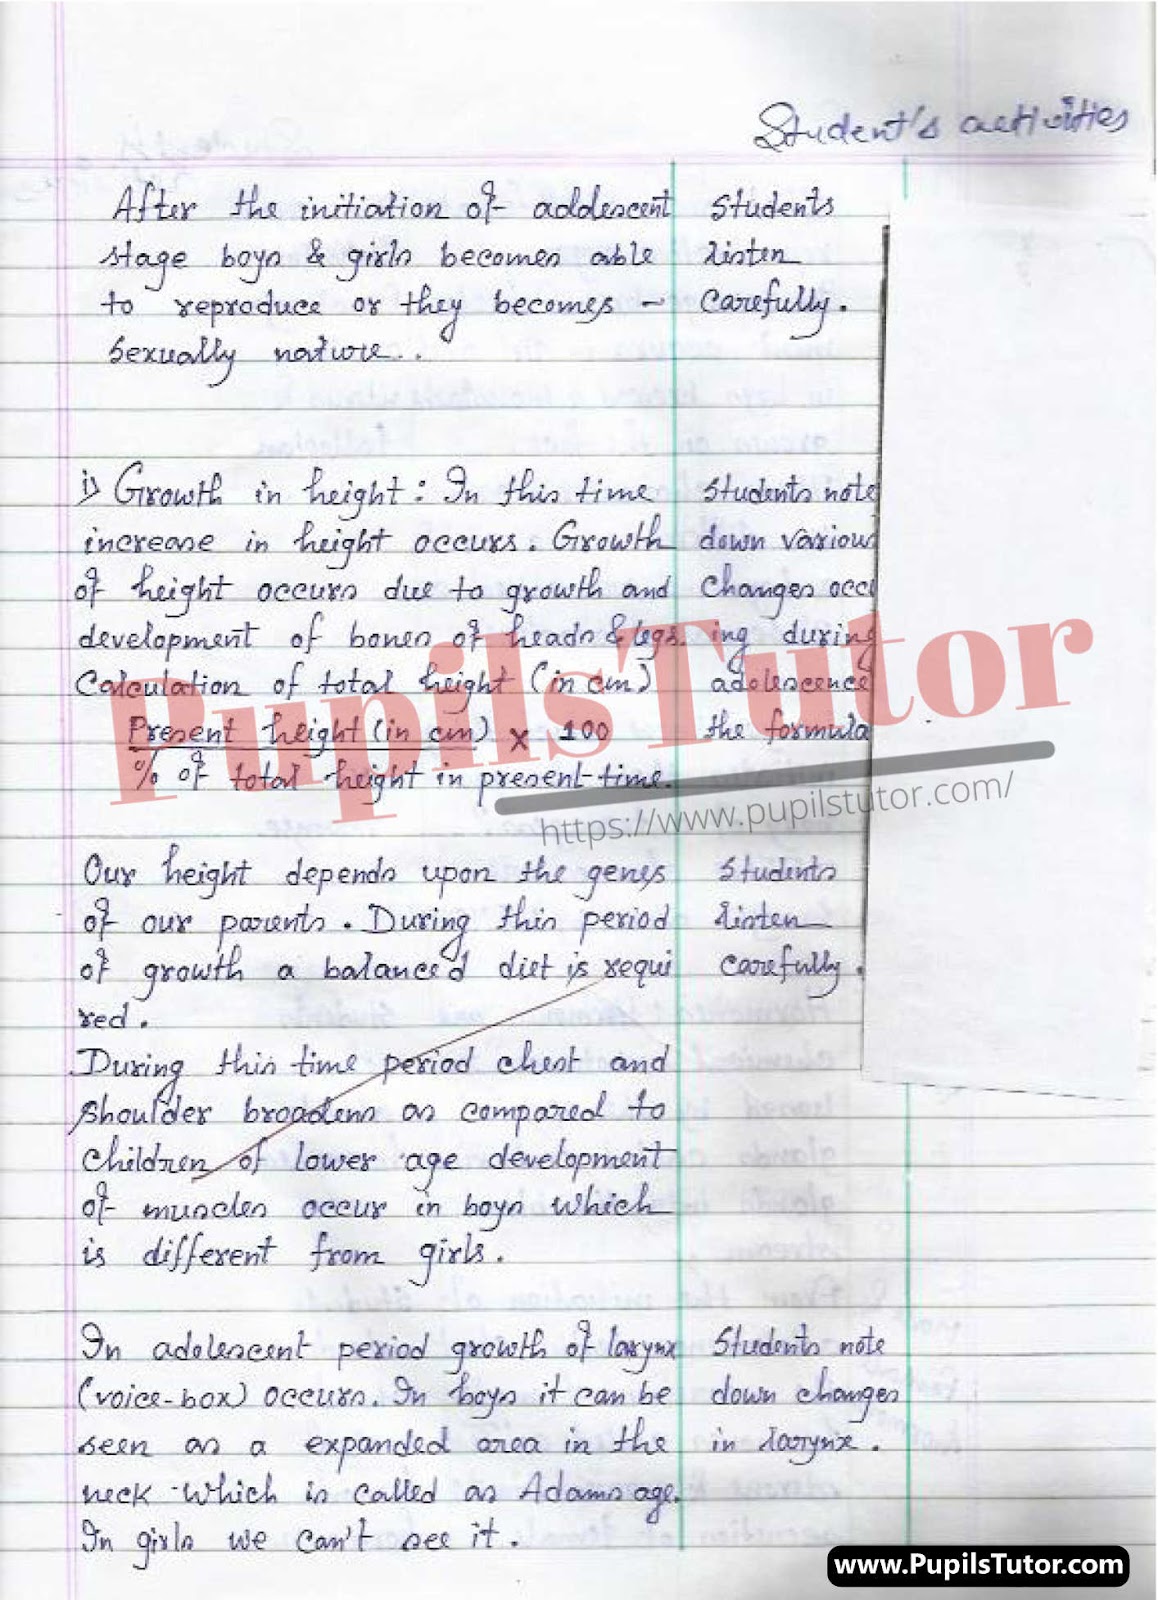 Physical Education And Science Lesson Plan On Adolescence For Class/Grade 8 For CBSE NCERT School And College Teachers  – (Page And Image Number 3) – www.pupilstutor.com